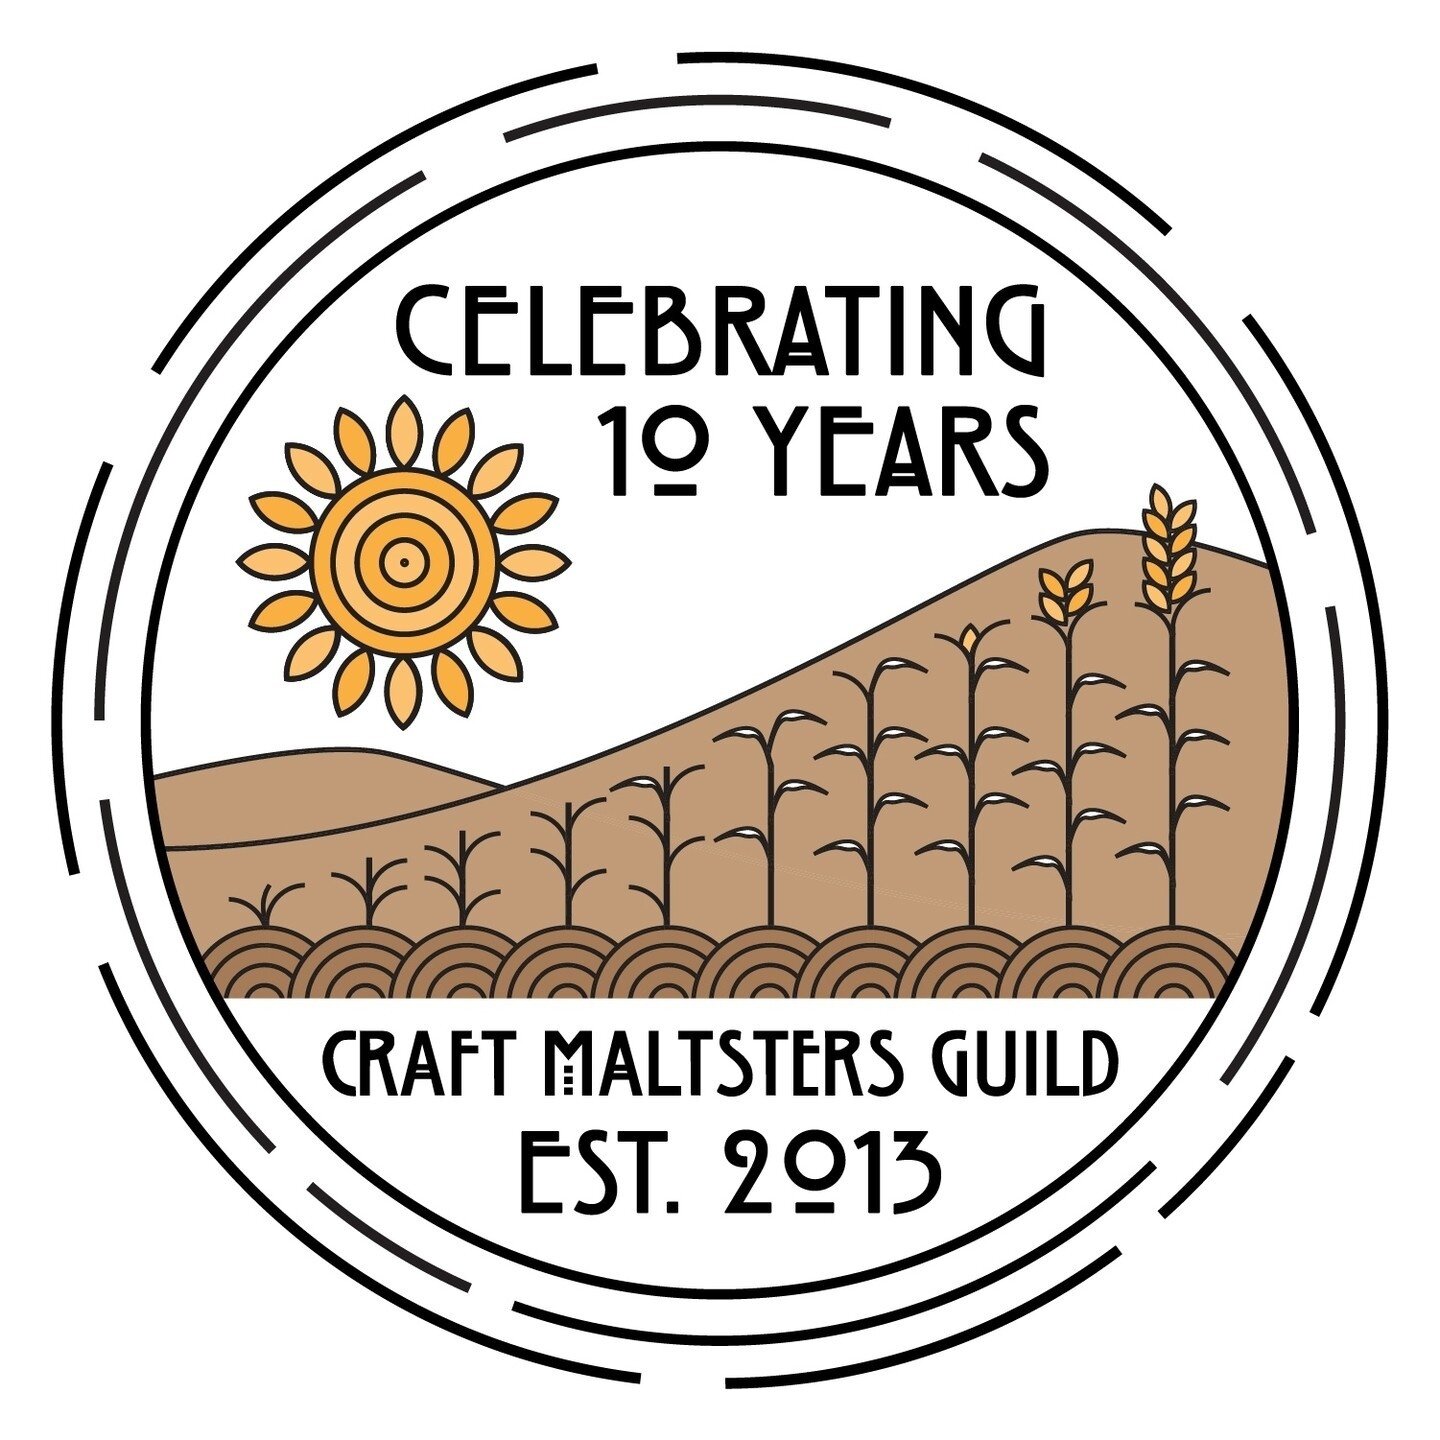 Hey all, Craft Malt Con 2023 is coming in hot! March 16-18. Check out the celebratory session spotlight below and head to the link in our bio for conference info/registration. We welcome you to join us virtually or in-person in Portland, ME.⁠
⁠
Repos